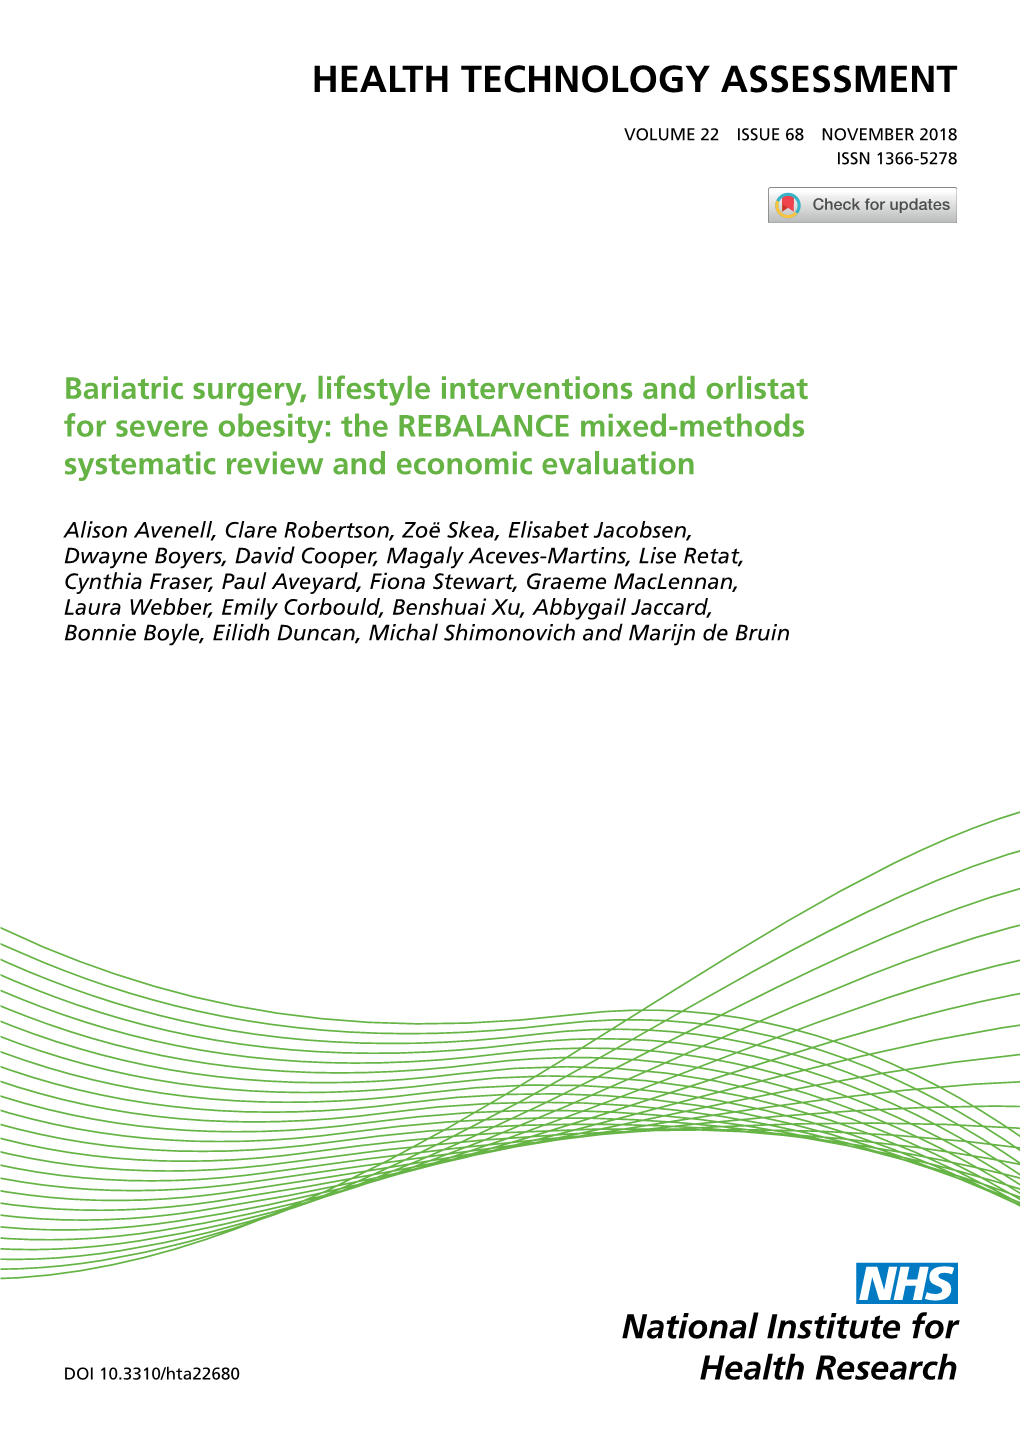 Bariatric Surgery, Lifestyle Interventions and Orlistat for Severe Obesity: the REBALANCE Mixed-Methods Systematic Review and Economic Evaluation